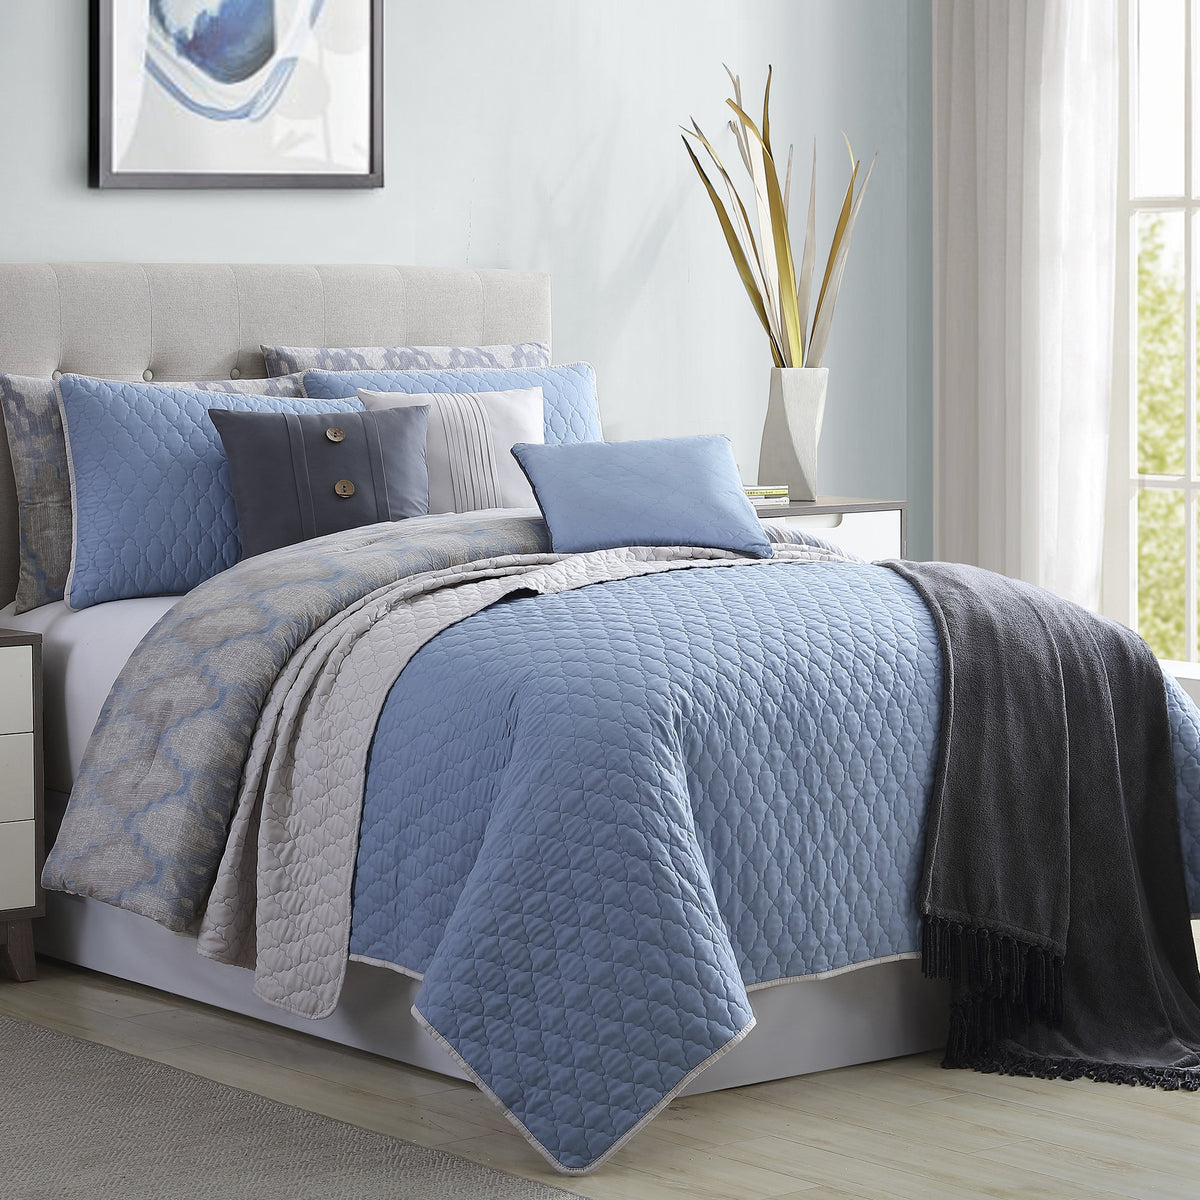 Andria 10 Piece Queen Size Comforter and Coverlet Set , Blue and Gray - BM202793